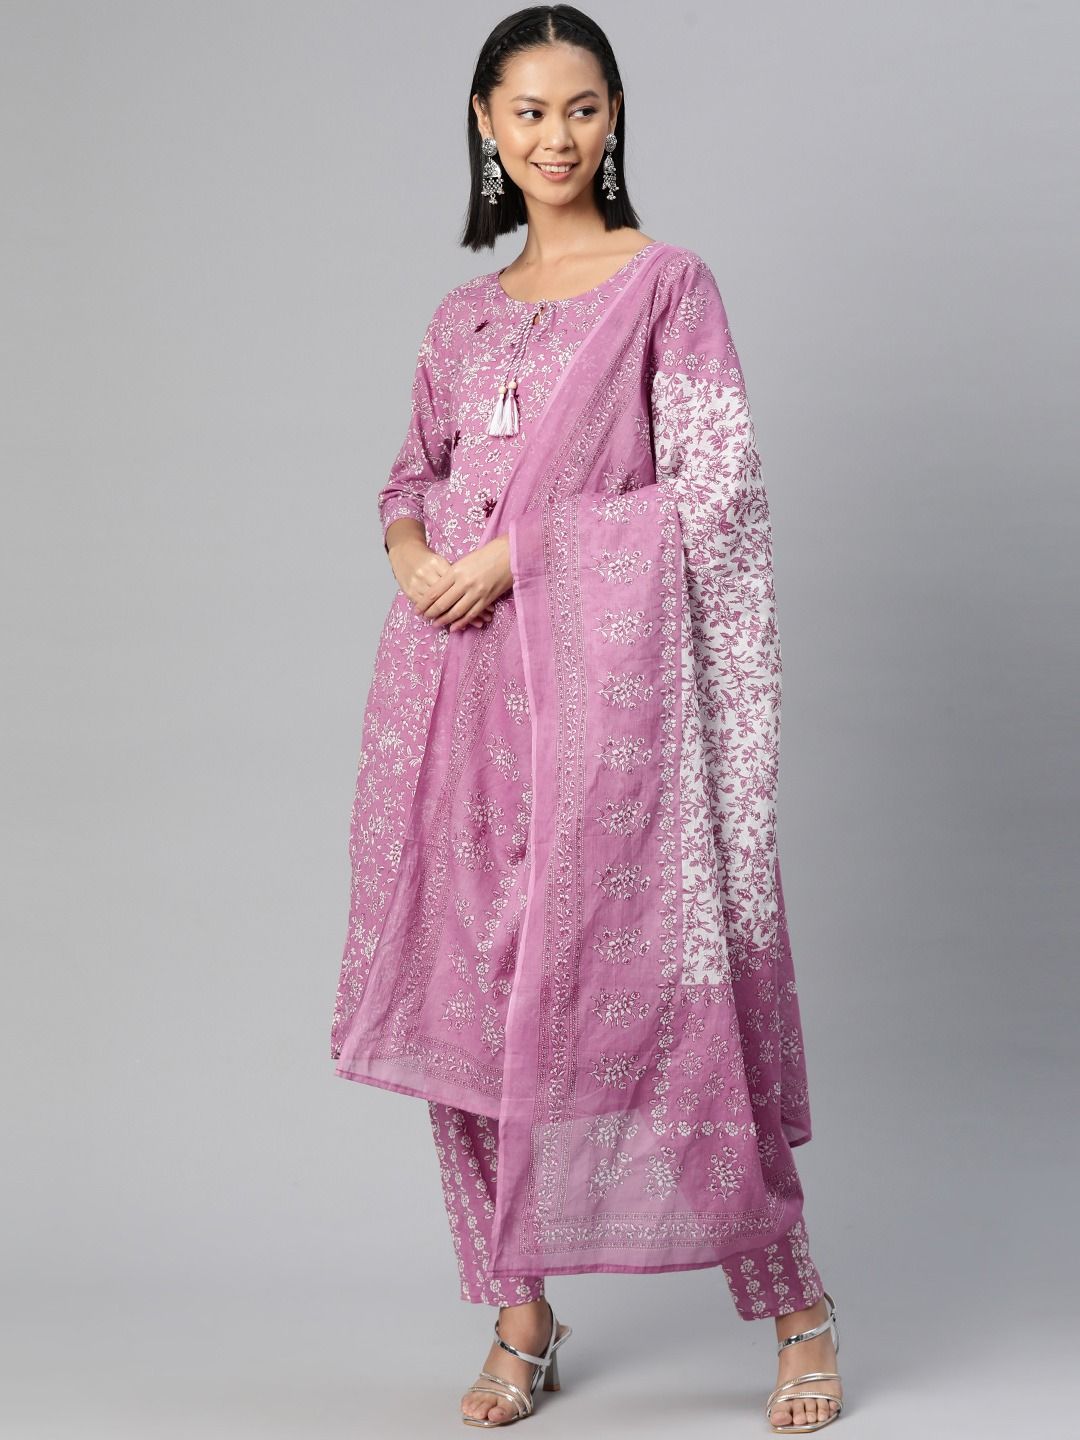 Straight Style Cotton Fabric Purple Color Kurti And Bottom With Dupatta